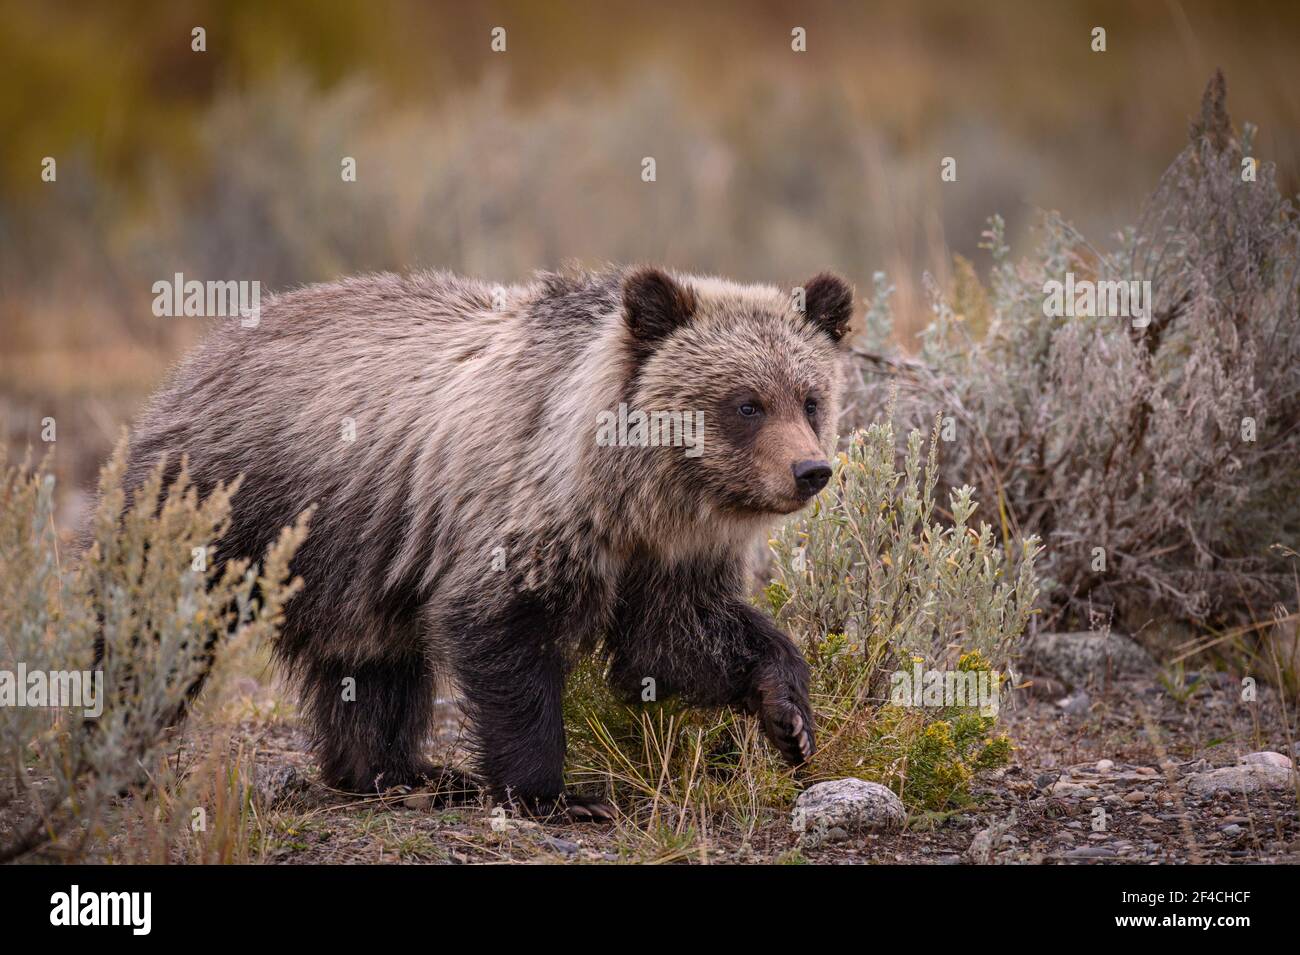 Grizzly bear cub in Lamar Valley, Yellowstone National Park, Wyoming, USA. Stock Photo